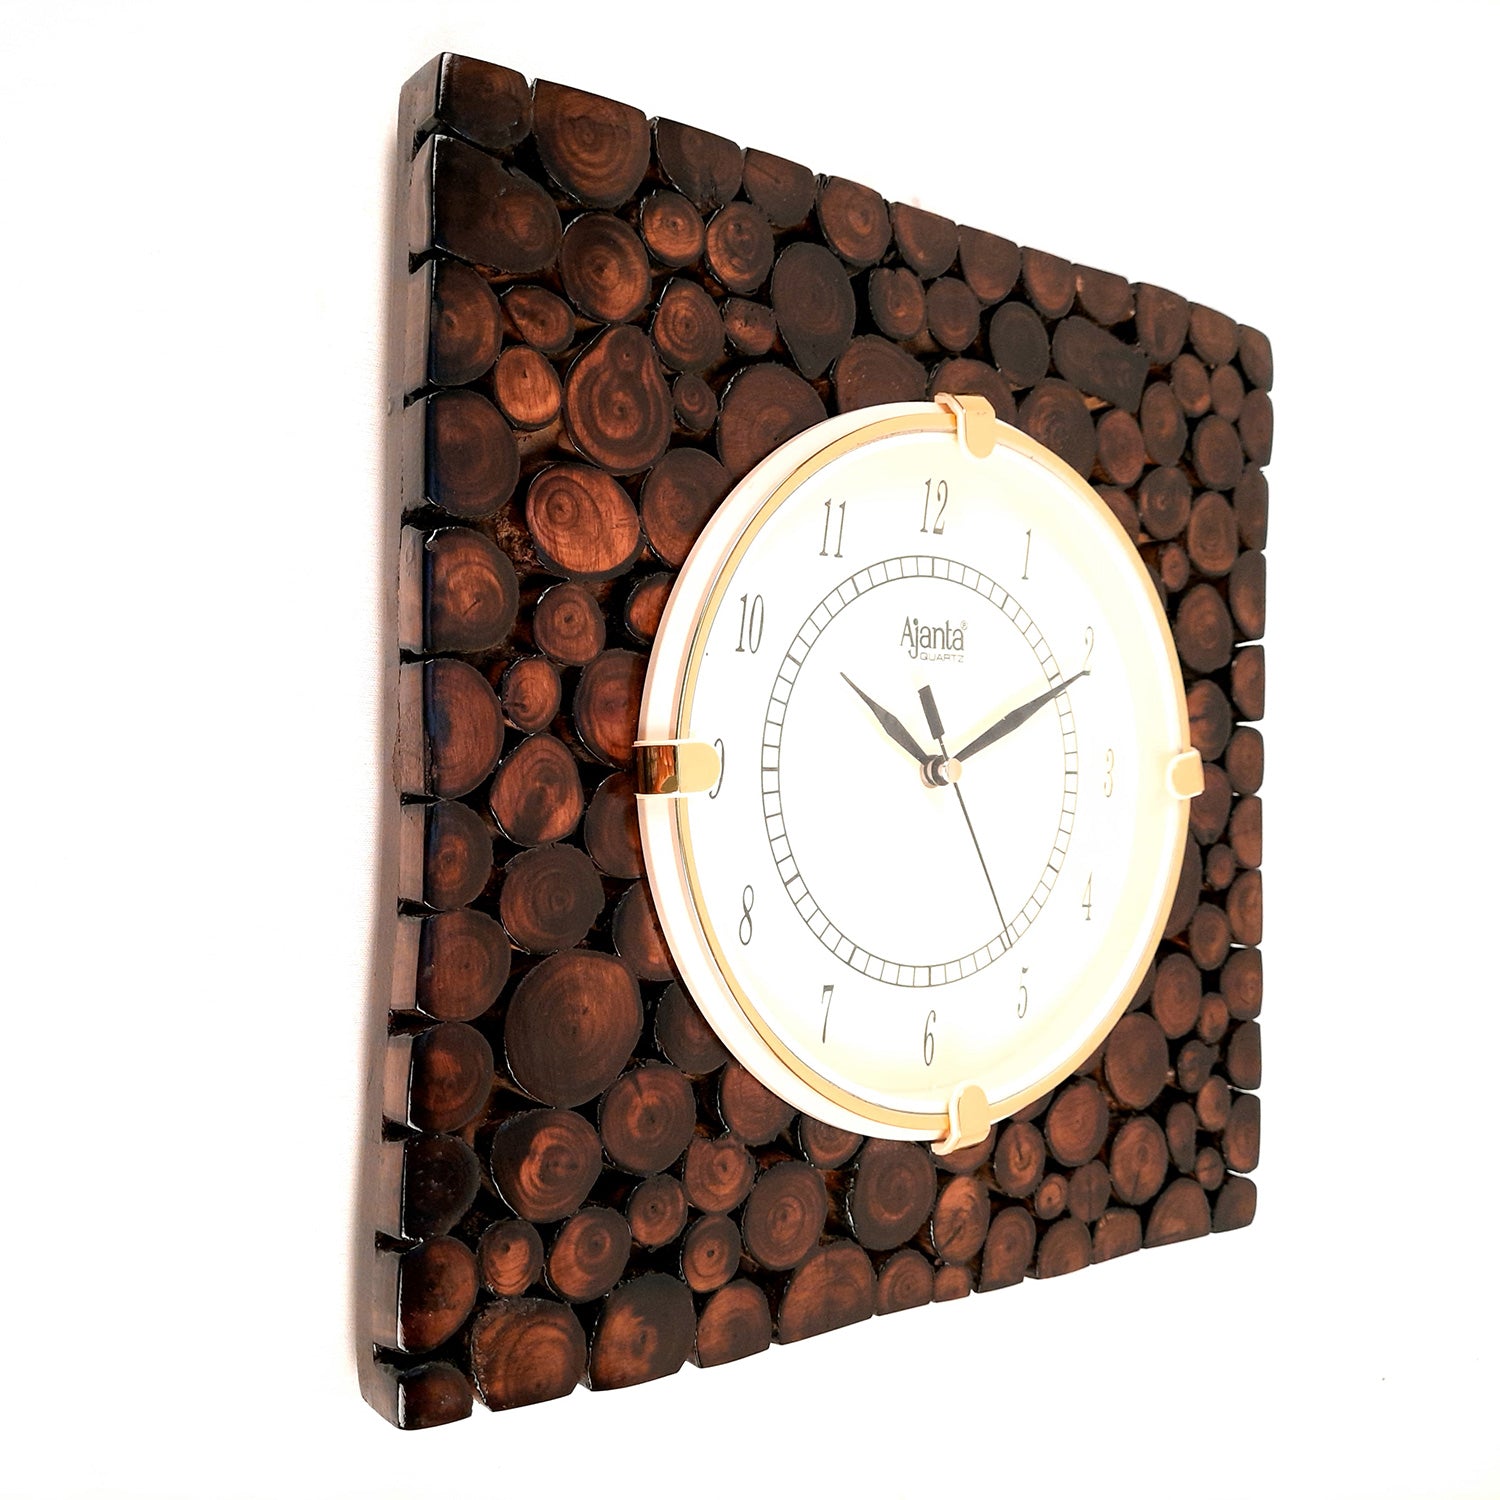 Wooden Wall Clock With Natural Wood Finish | Antique Clock Wall Mount - For Home, Living Room, Bedroom, Office & Hall Decoration | Wedding & Housewarming Gift - 12 Inch - Apkamart